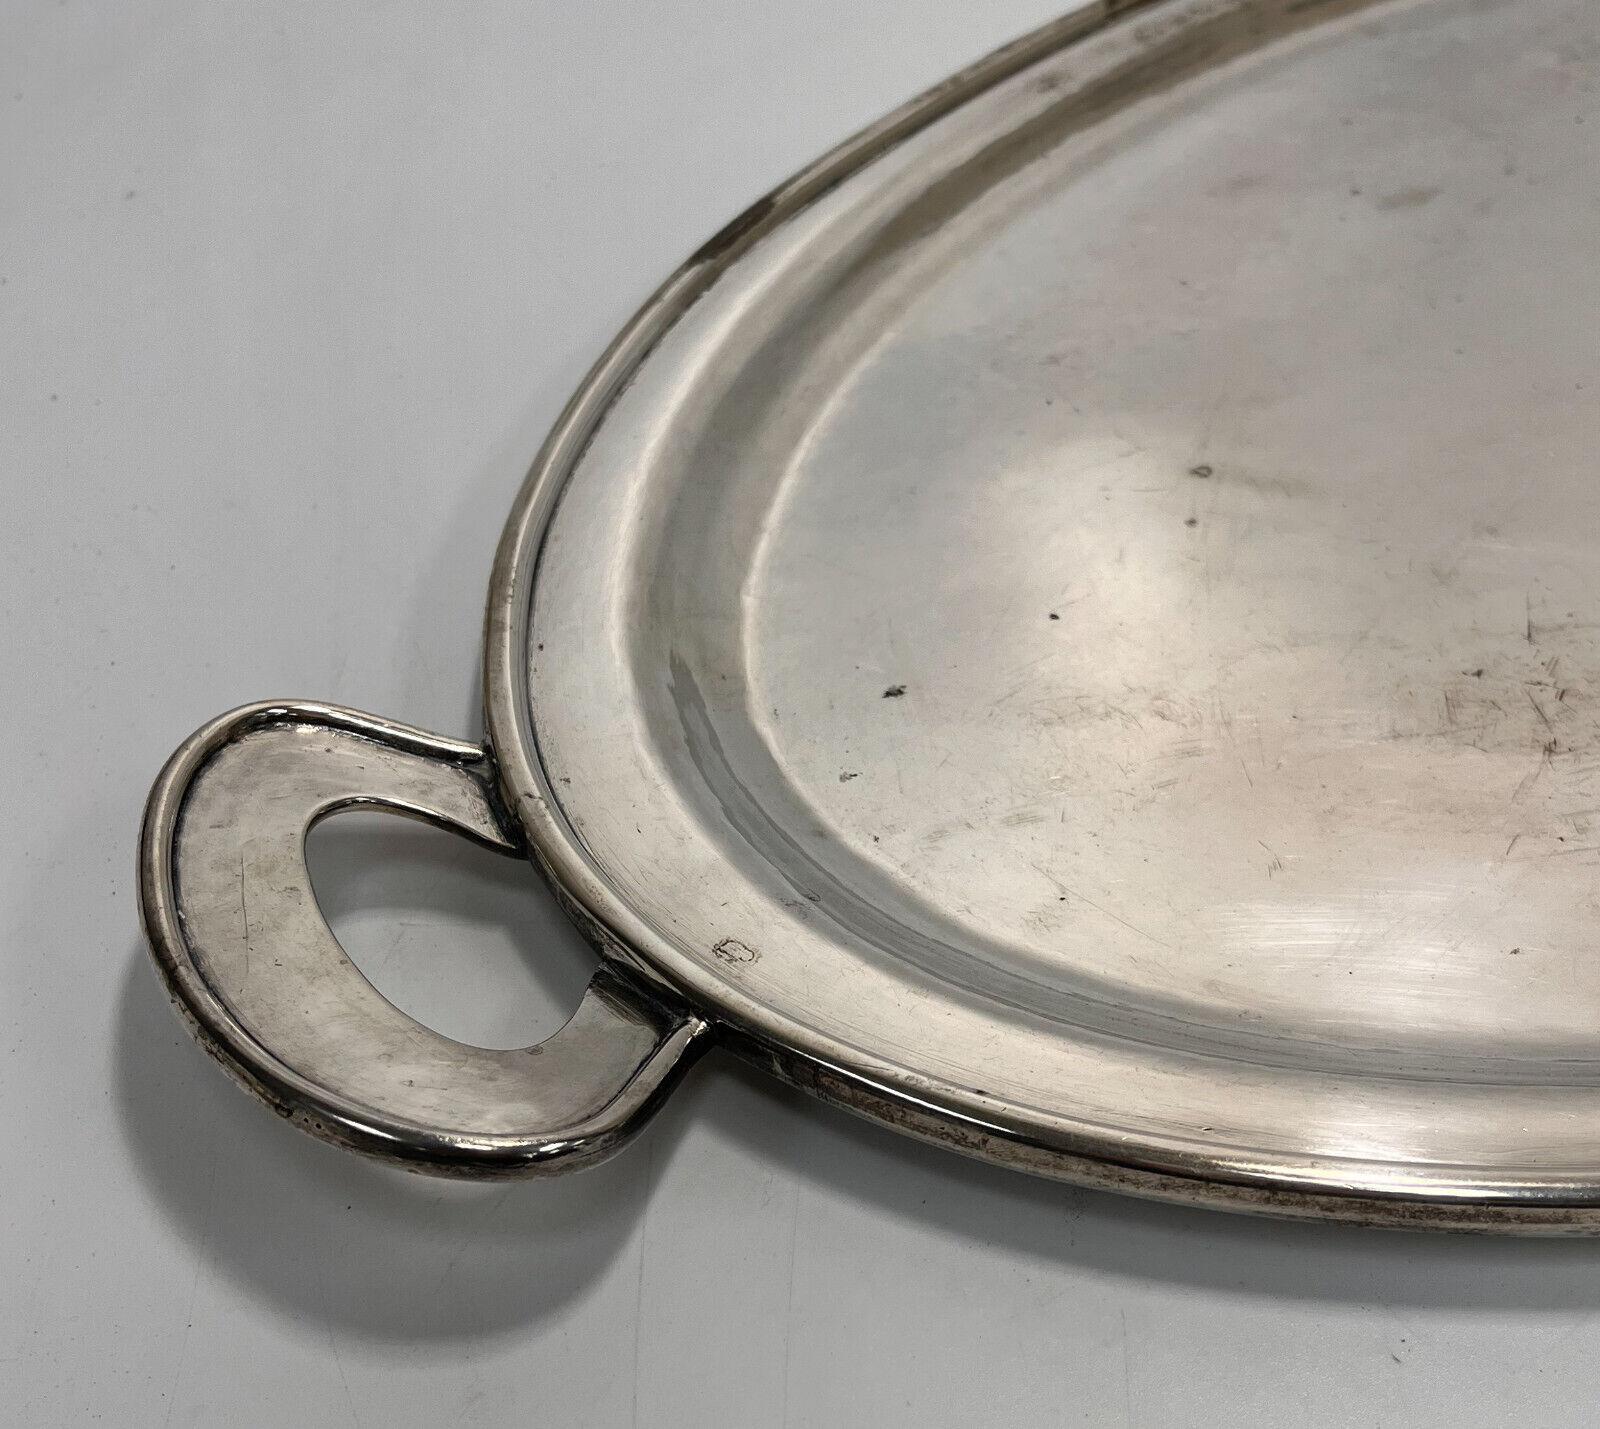  The Kalo Shops Sterling Silver Hand Wrought Handled Oval Serving Tray #208 c191 In Good Condition For Sale In Gardena, CA